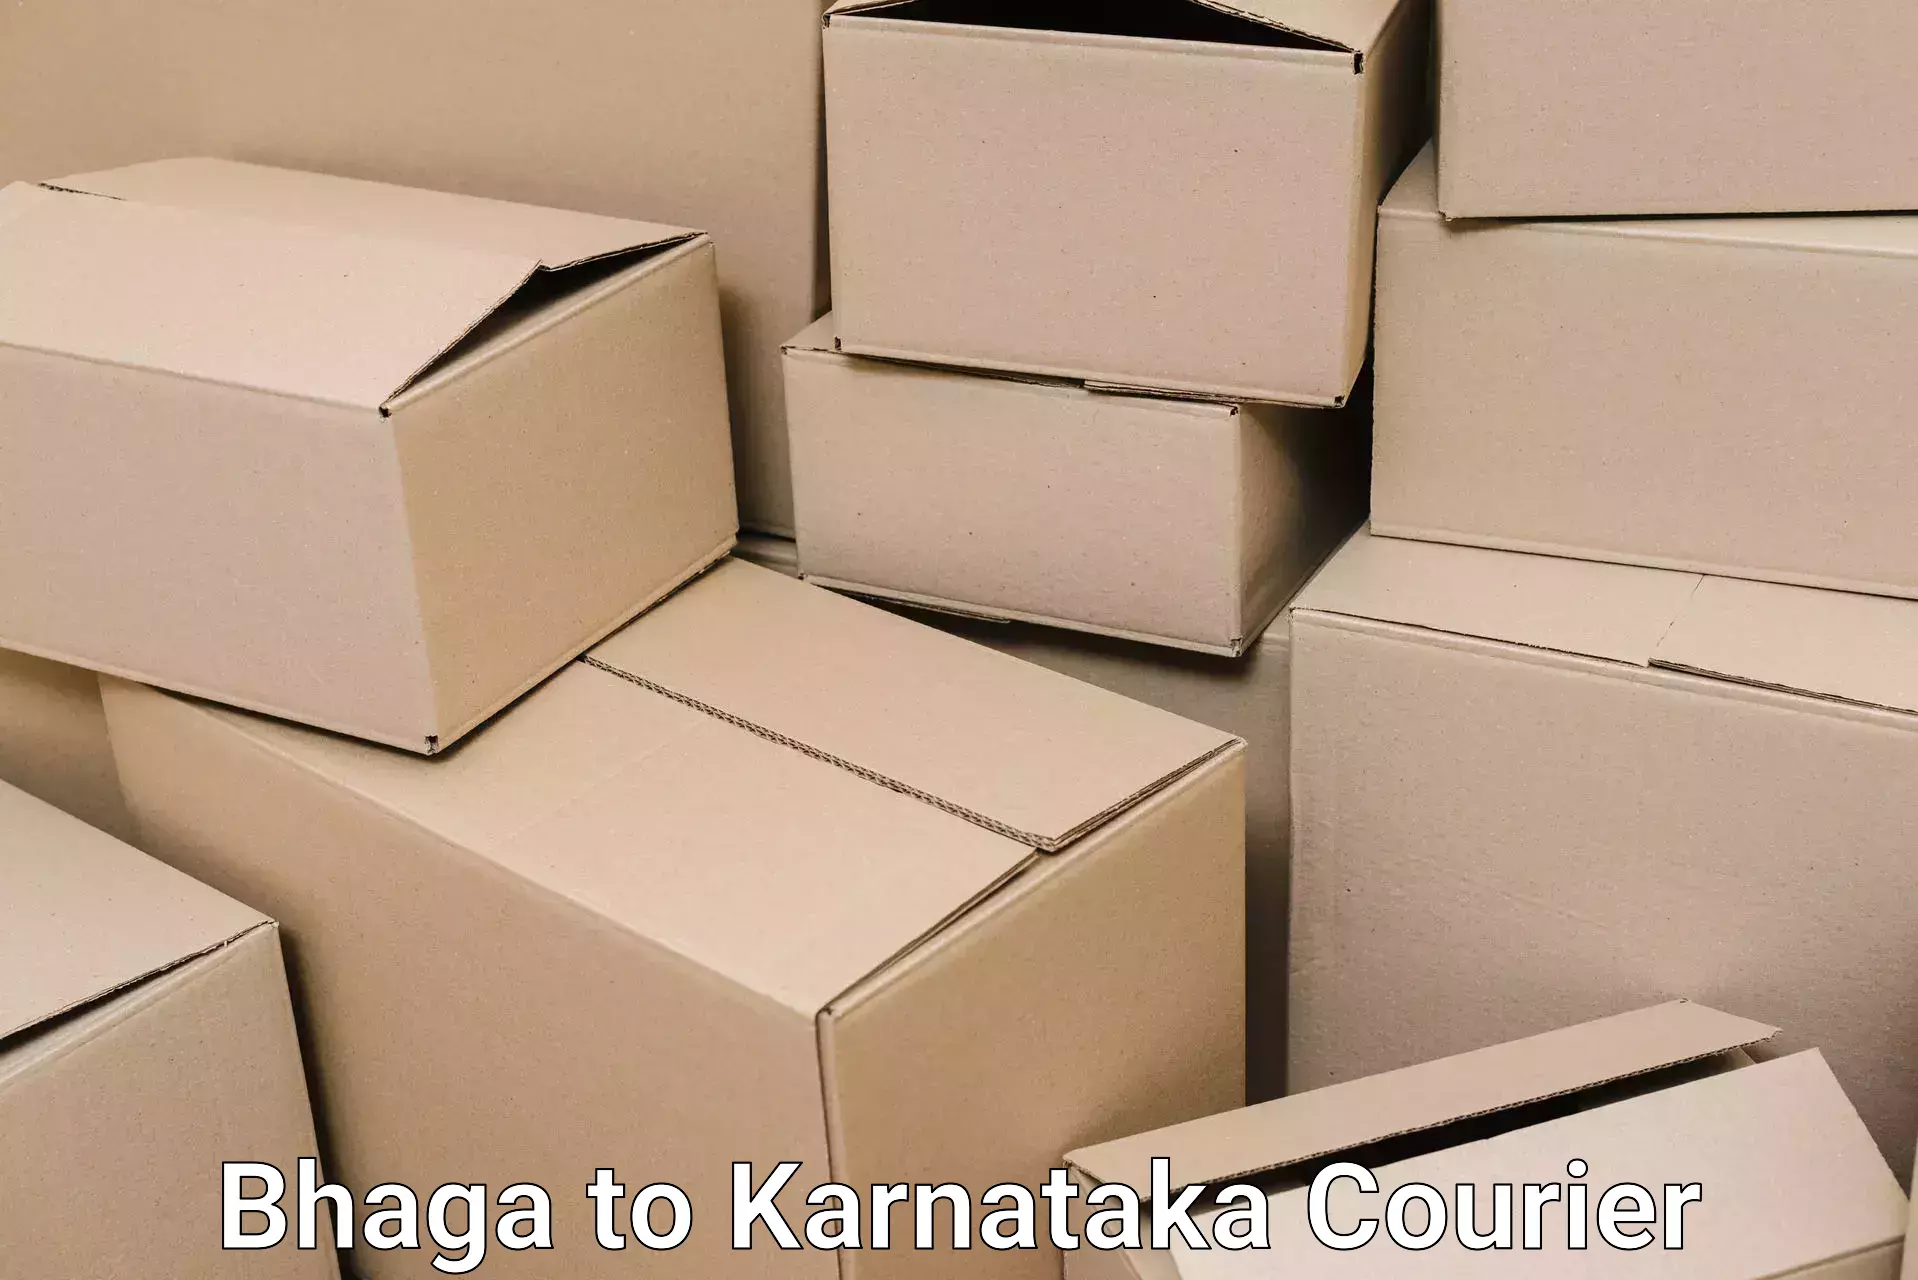 Furniture delivery service Bhaga to Laxmeshwar